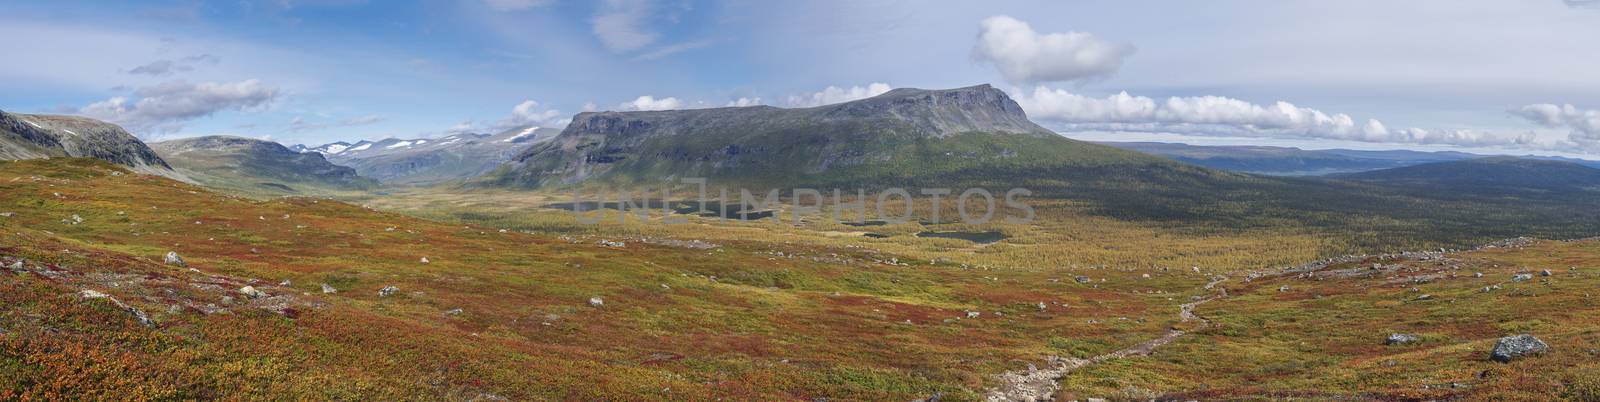 Panoramic landscape of wild nature in Sarek national park in Sweden Lapland with snow capped mountain peaks, river and lake, birch and spruce tree forest. Early autumn colors, blue sky white clouds. by Henkeova